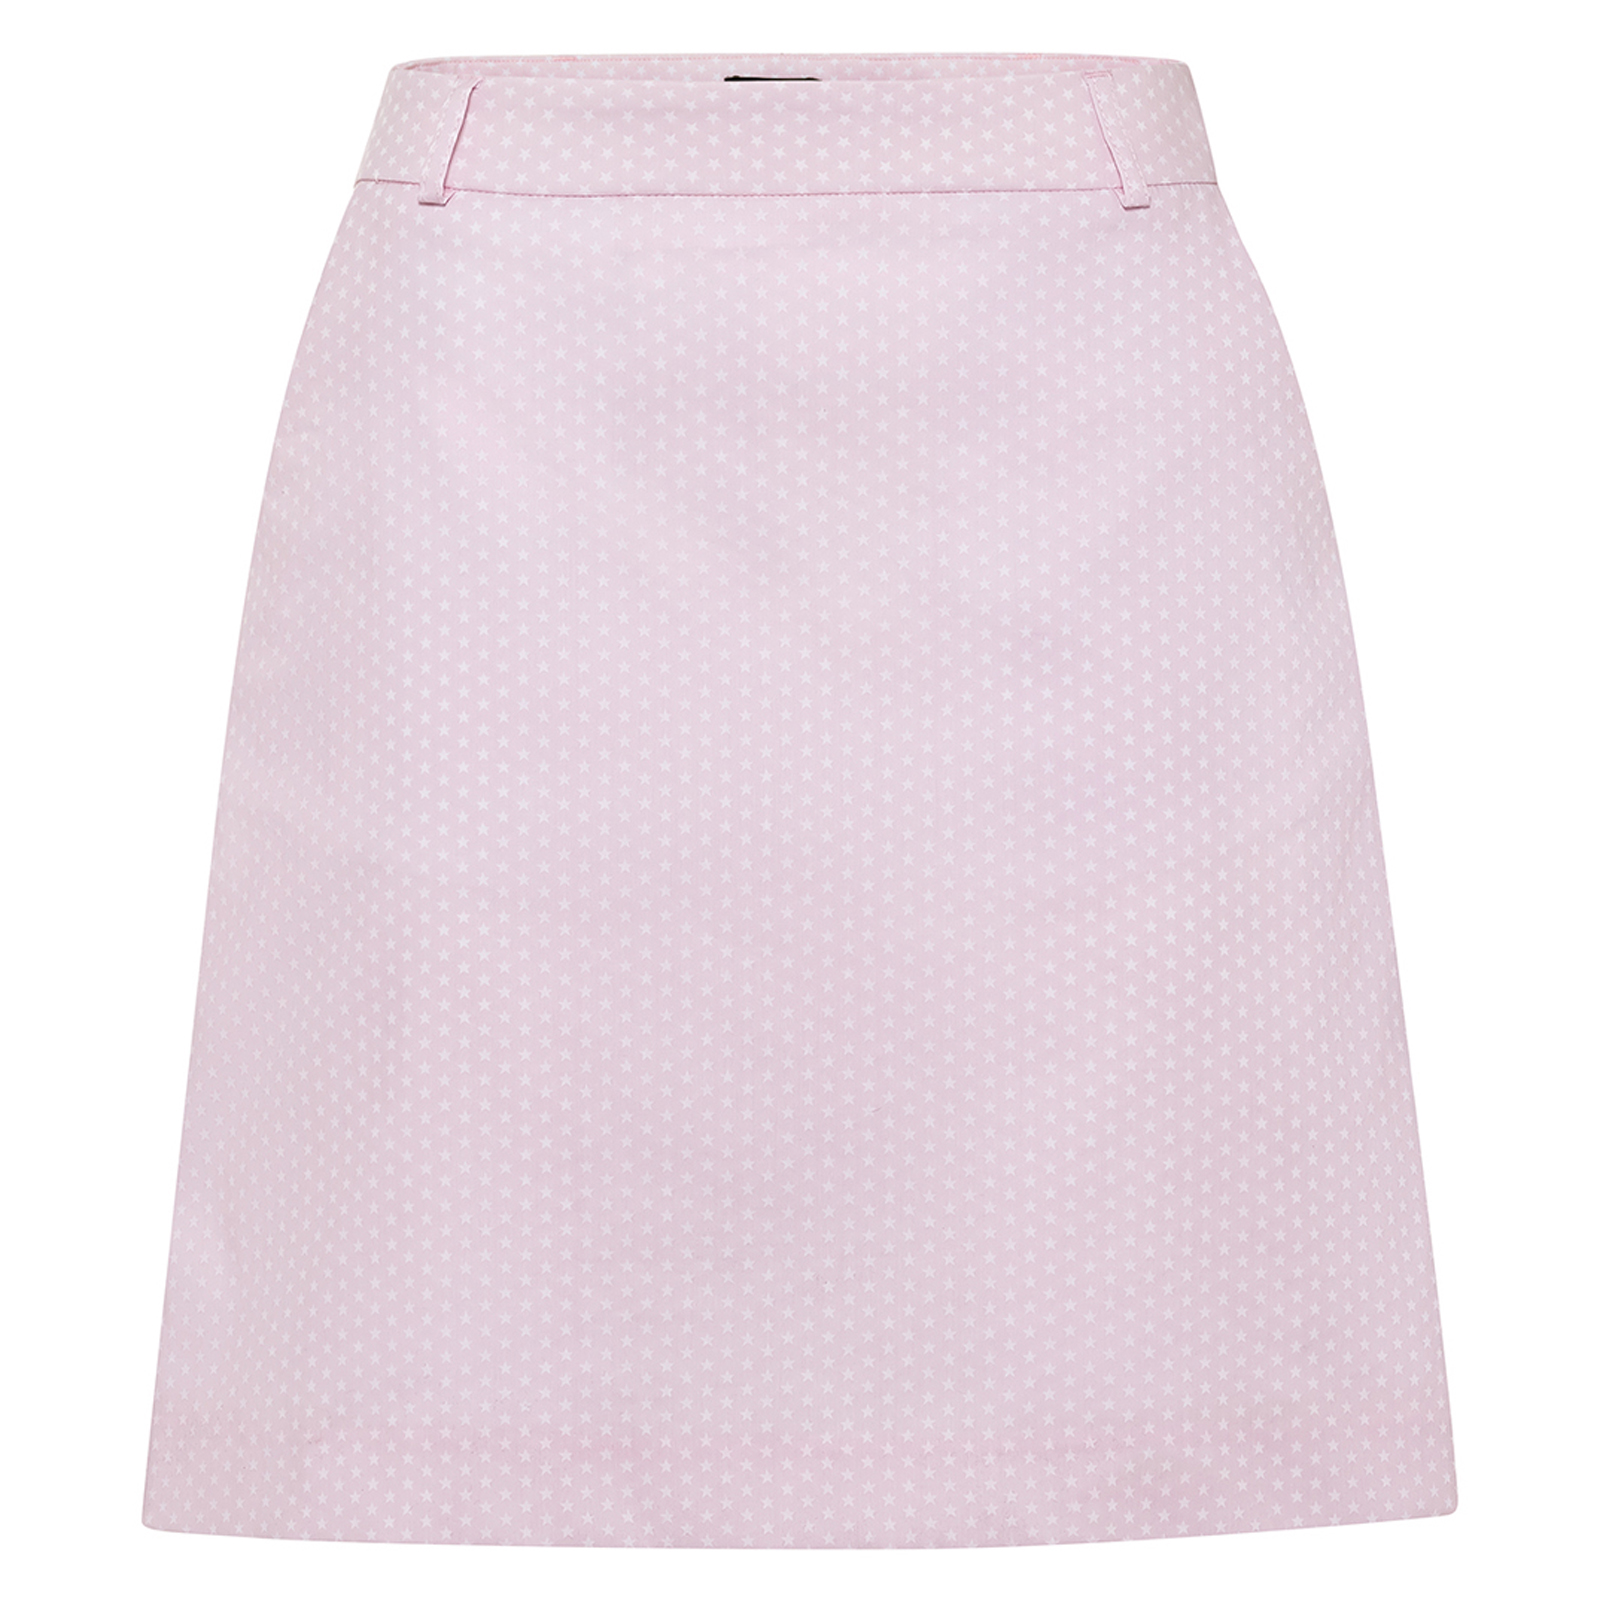 Ladies' long golf skort with extra stretch comfort and fashionable pattern